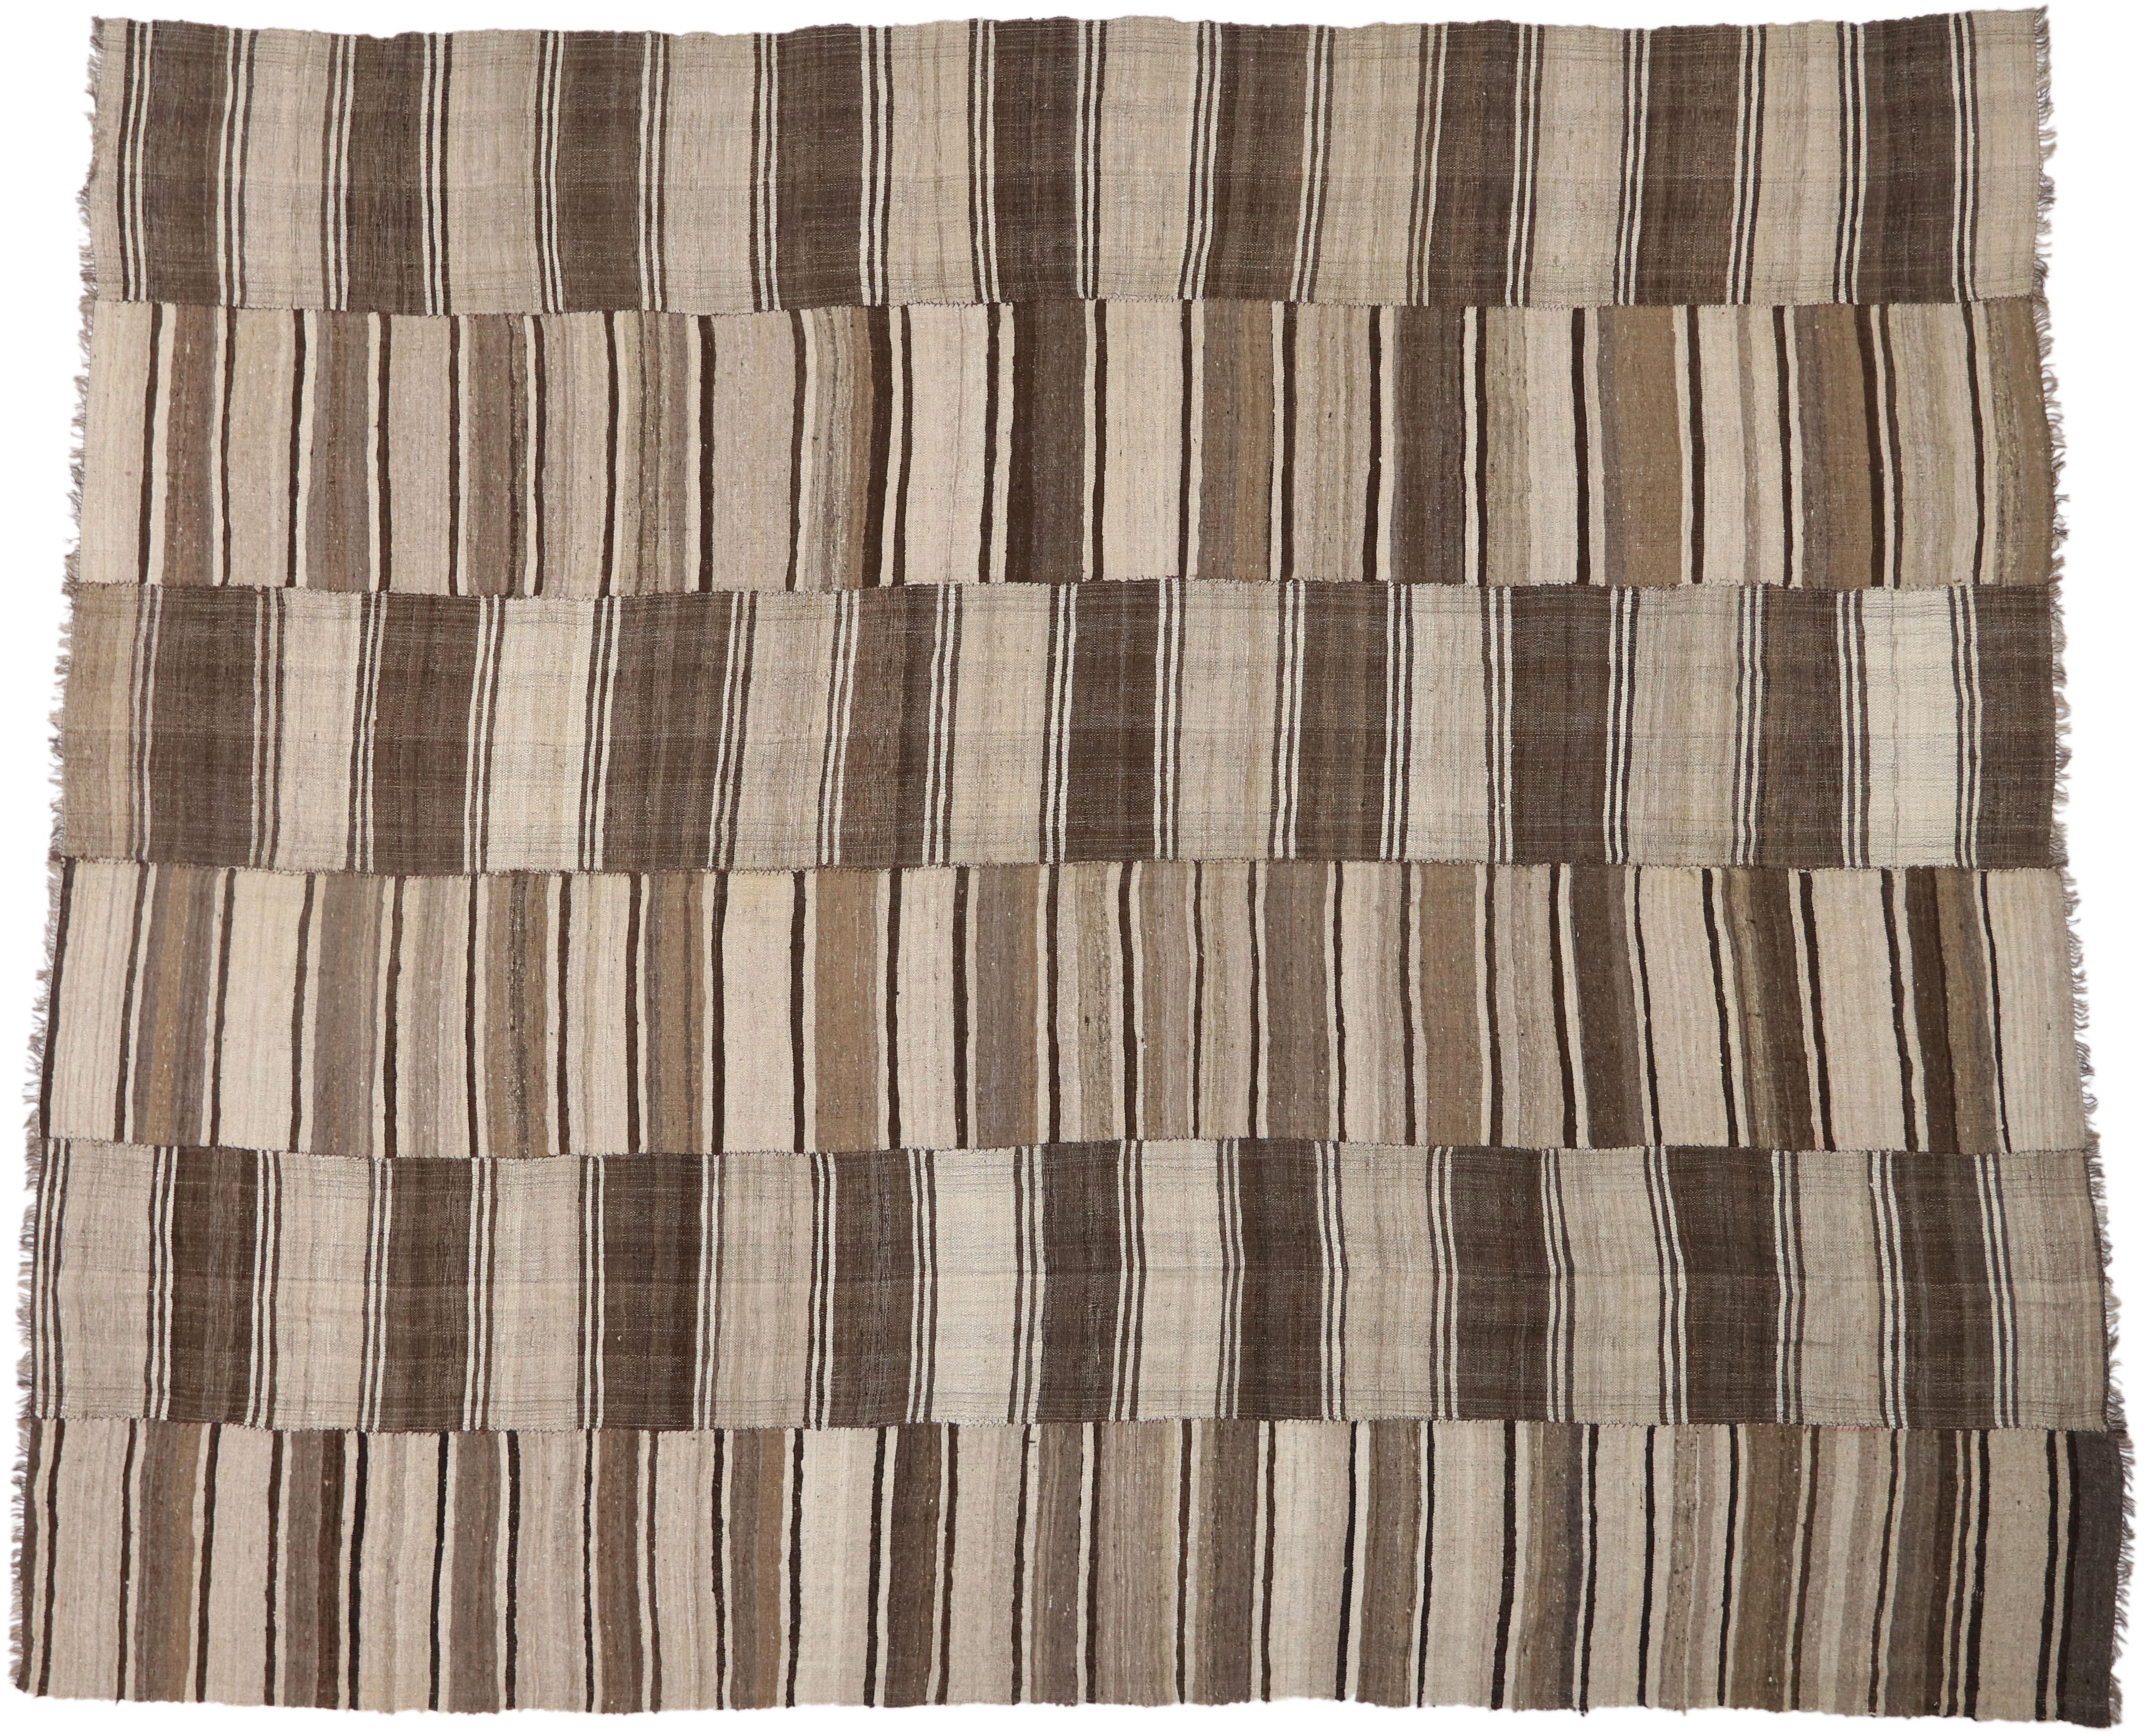 76395 Vintage Persian Mazandaran Kilim Rug with Mid-Century Modern Style. Create a cozy casual and modern setting with this vintage Persian Kilim rug from Mazandaran in north central Iran. Featuring a simplistic style and modest palette, the